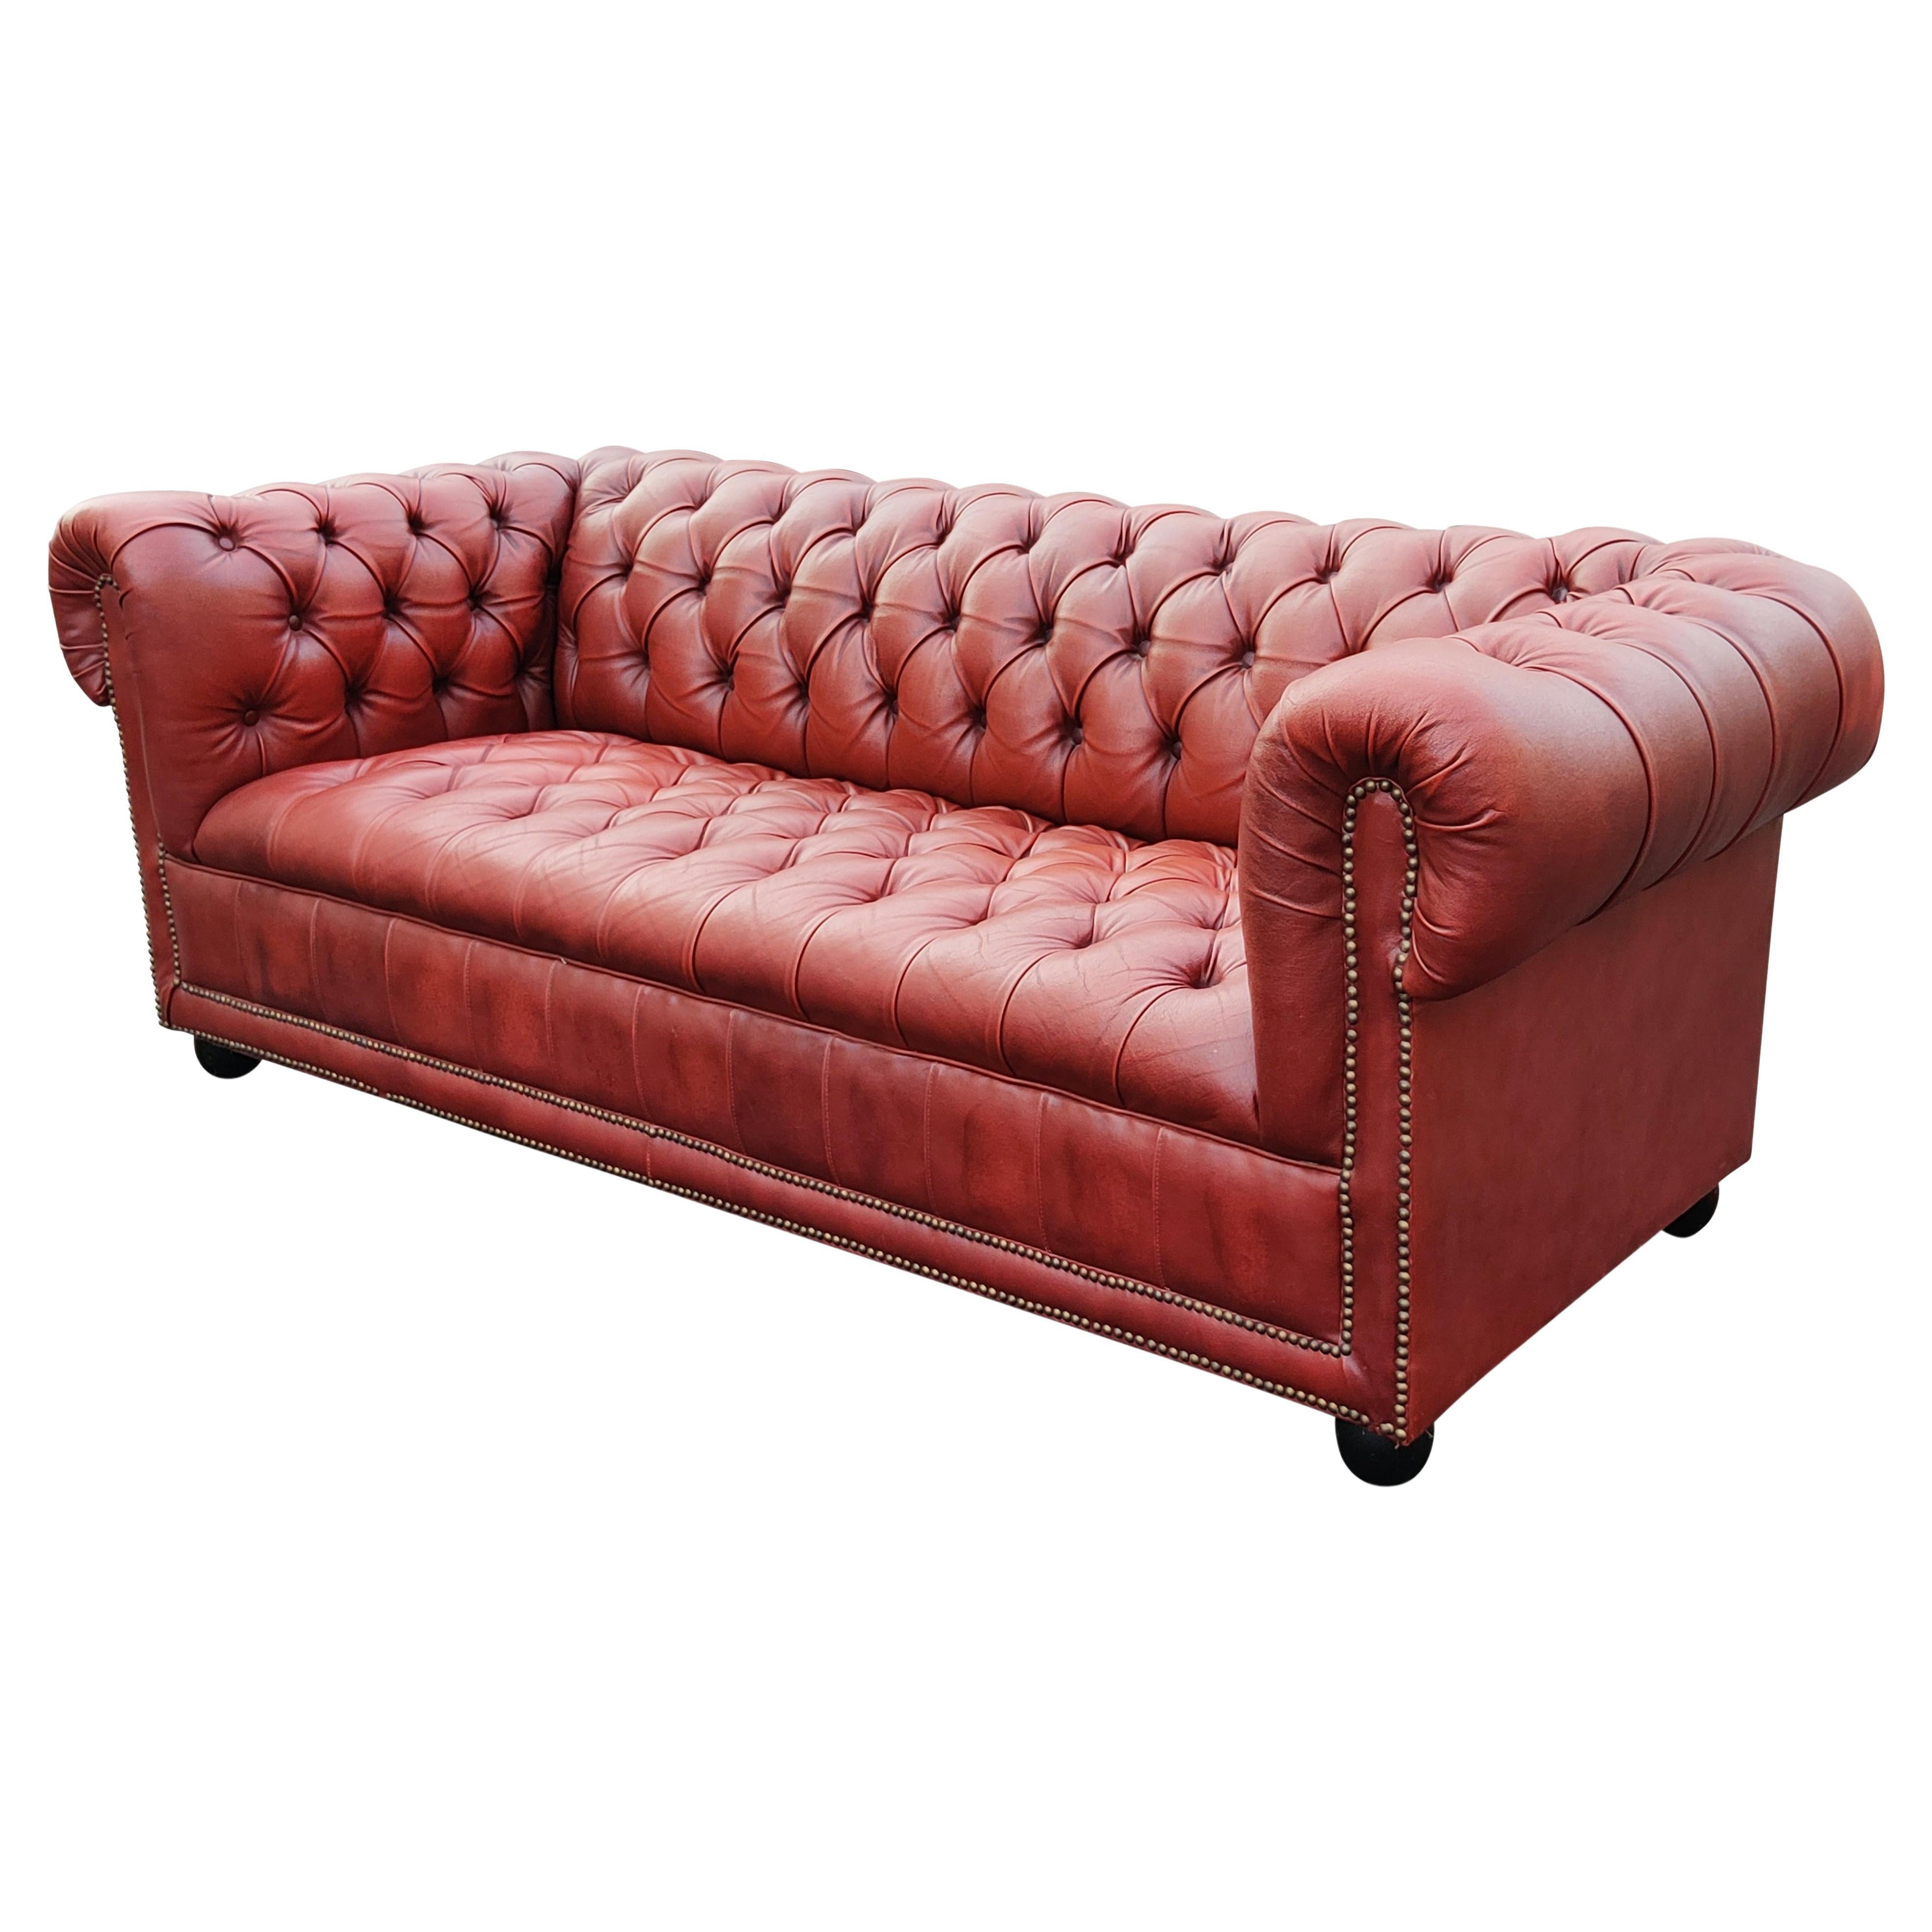 English Chesterfield Cardovian Oxblood Tufted Leather Sofa